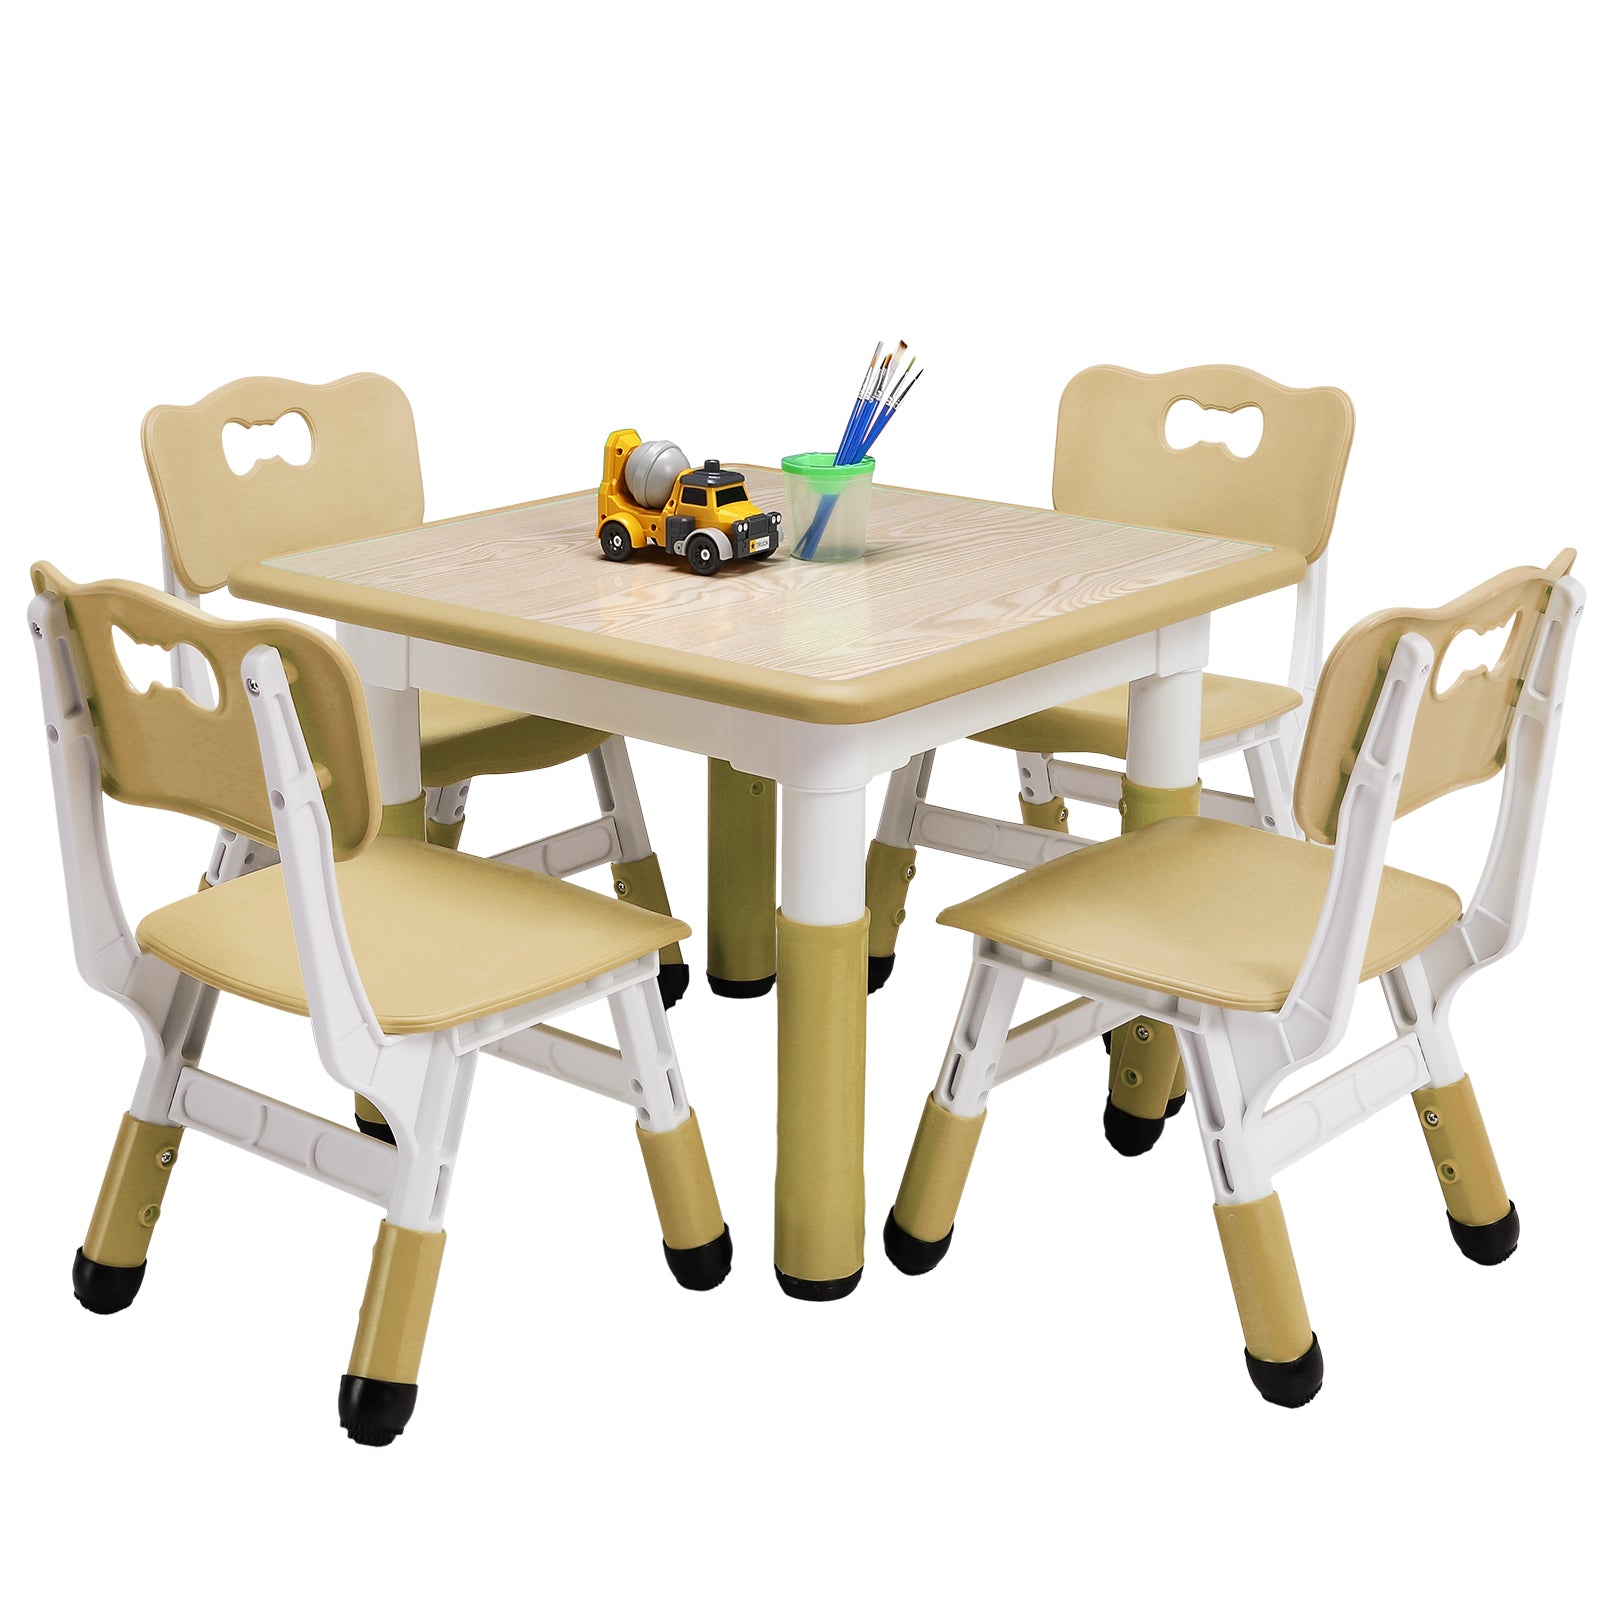 GARVEE Kids Table and Chairs Set, Height Adjustable Desk with 4 Seats, Graffiti Desktop, Non-Slip Legs, Max 300lbs, Multi-Activity Table for Classrooms, Daycares, Home